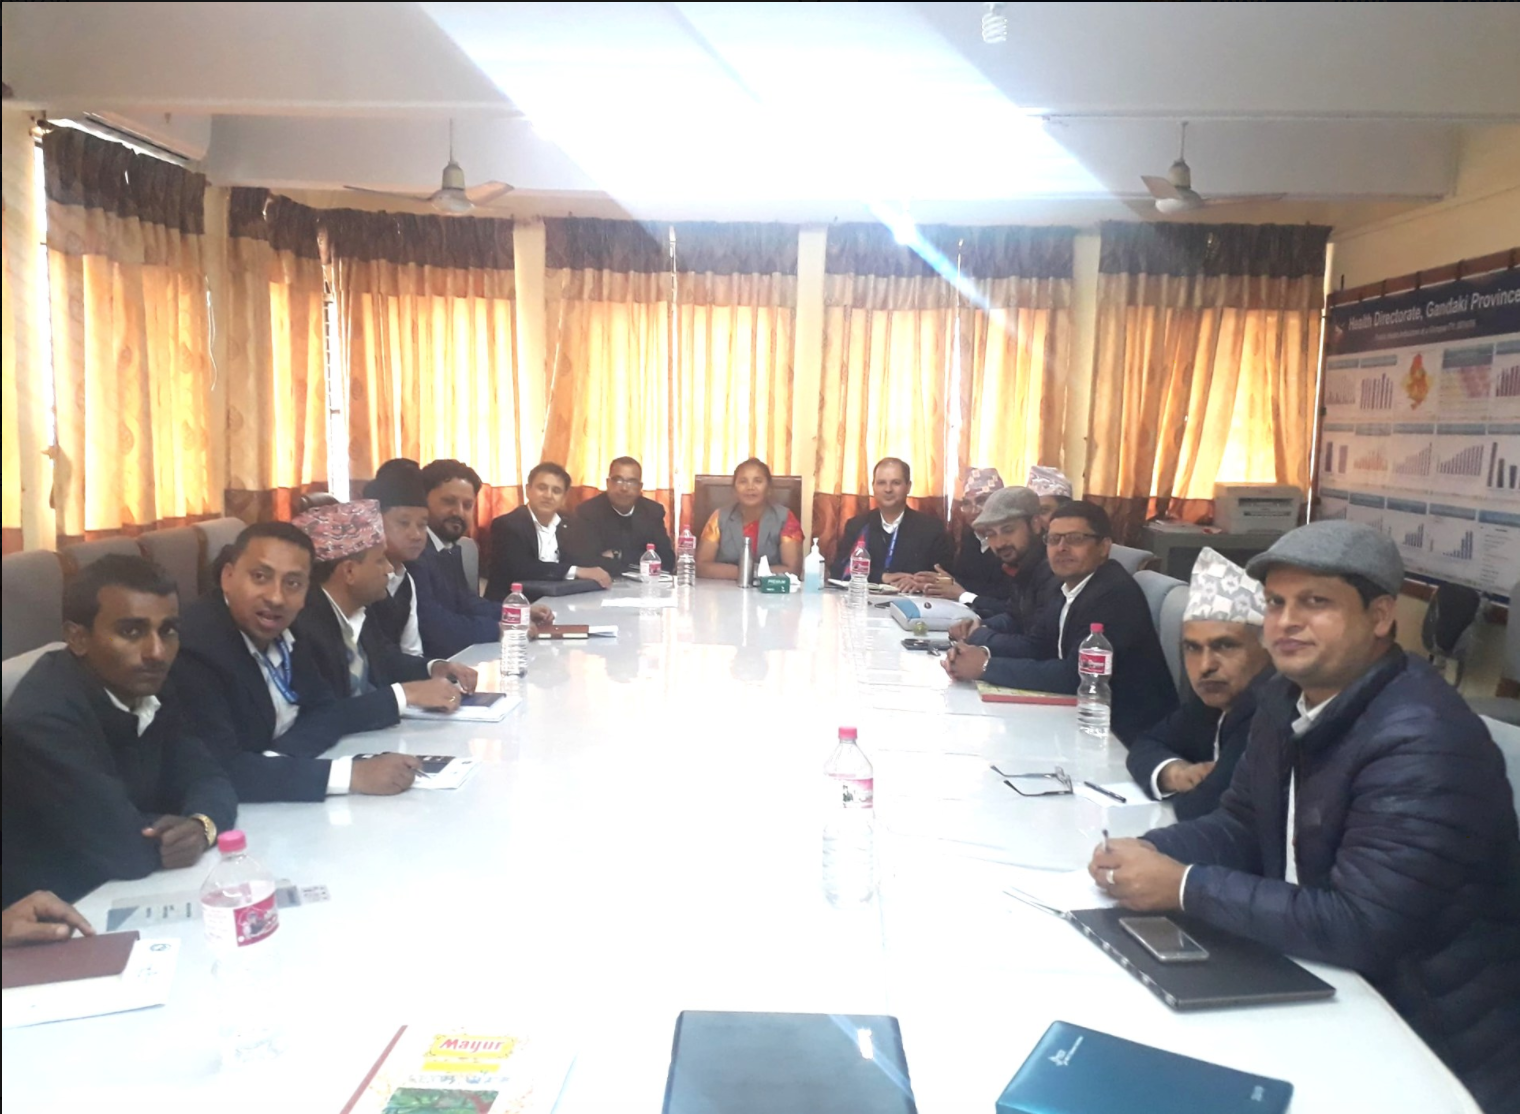 Hon Minister for Social Development Ms Nar Devi Pun meets with the team of health directorate to discuss the ongoing programs, achievements and issues that could be addressed to expedite the processes of program organisation.